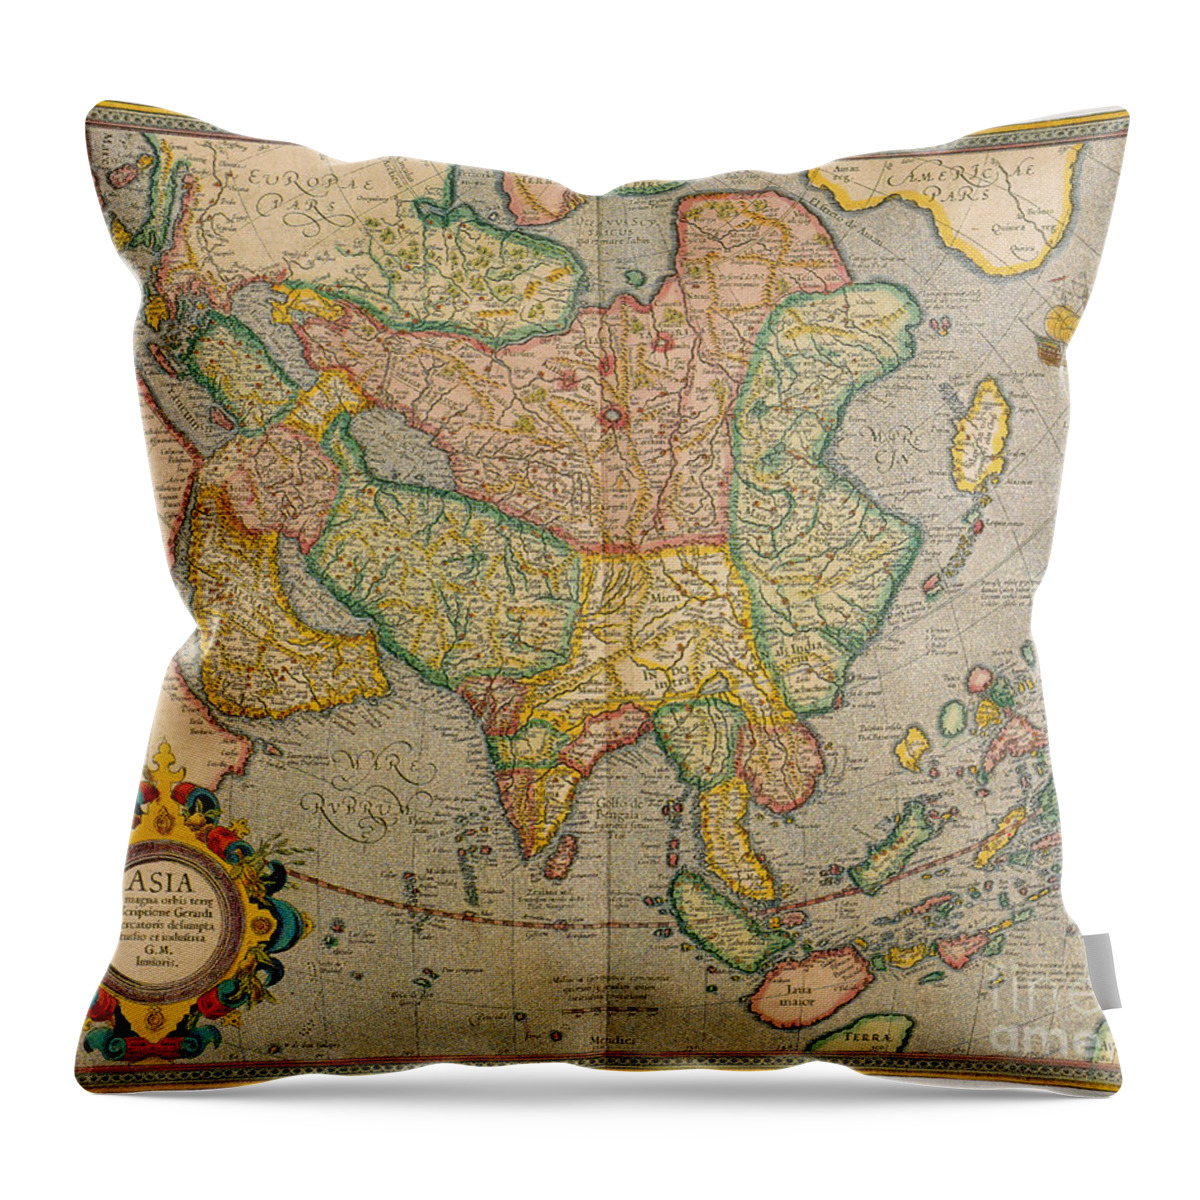 Cartography Throw Pillow featuring the photograph Mercators Map Of Asia by Photo Researchers